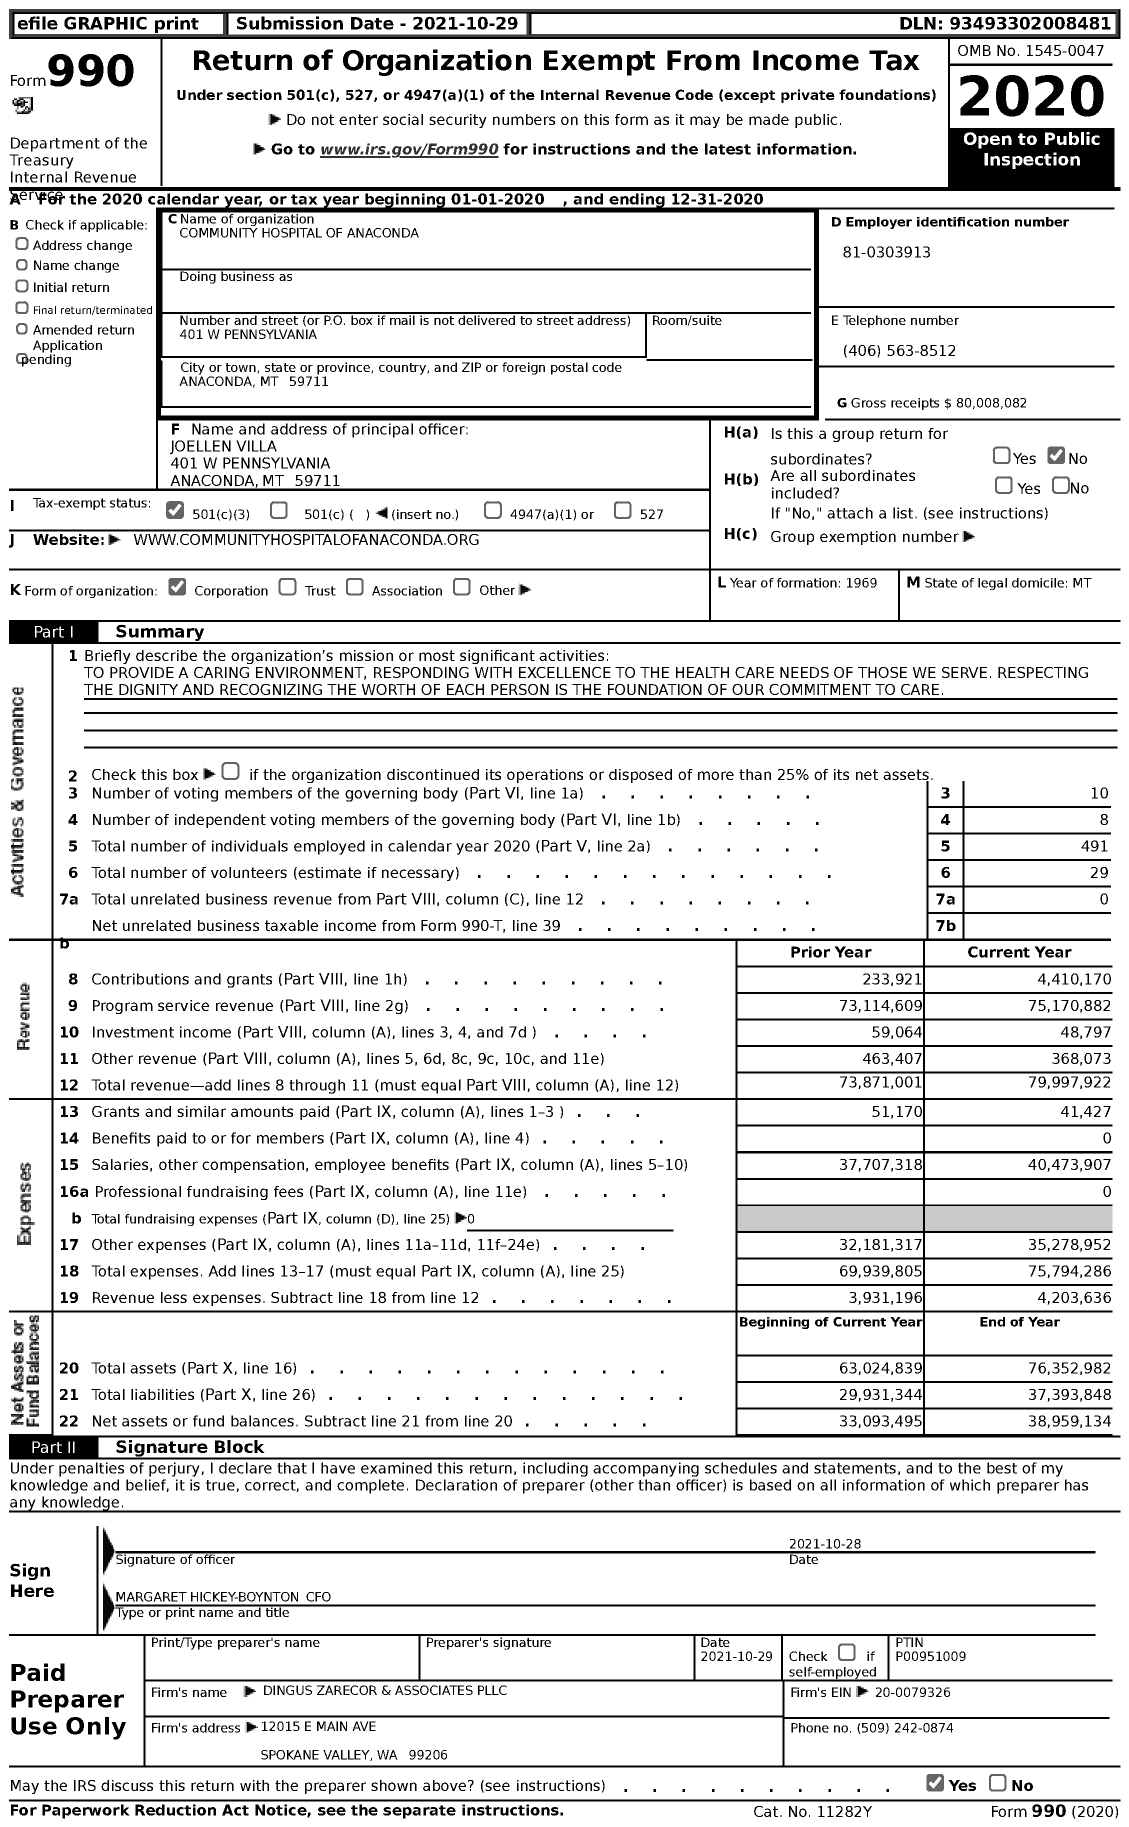 Image of first page of 2020 Form 990 for Community Hospital of Anaconda (CHA)